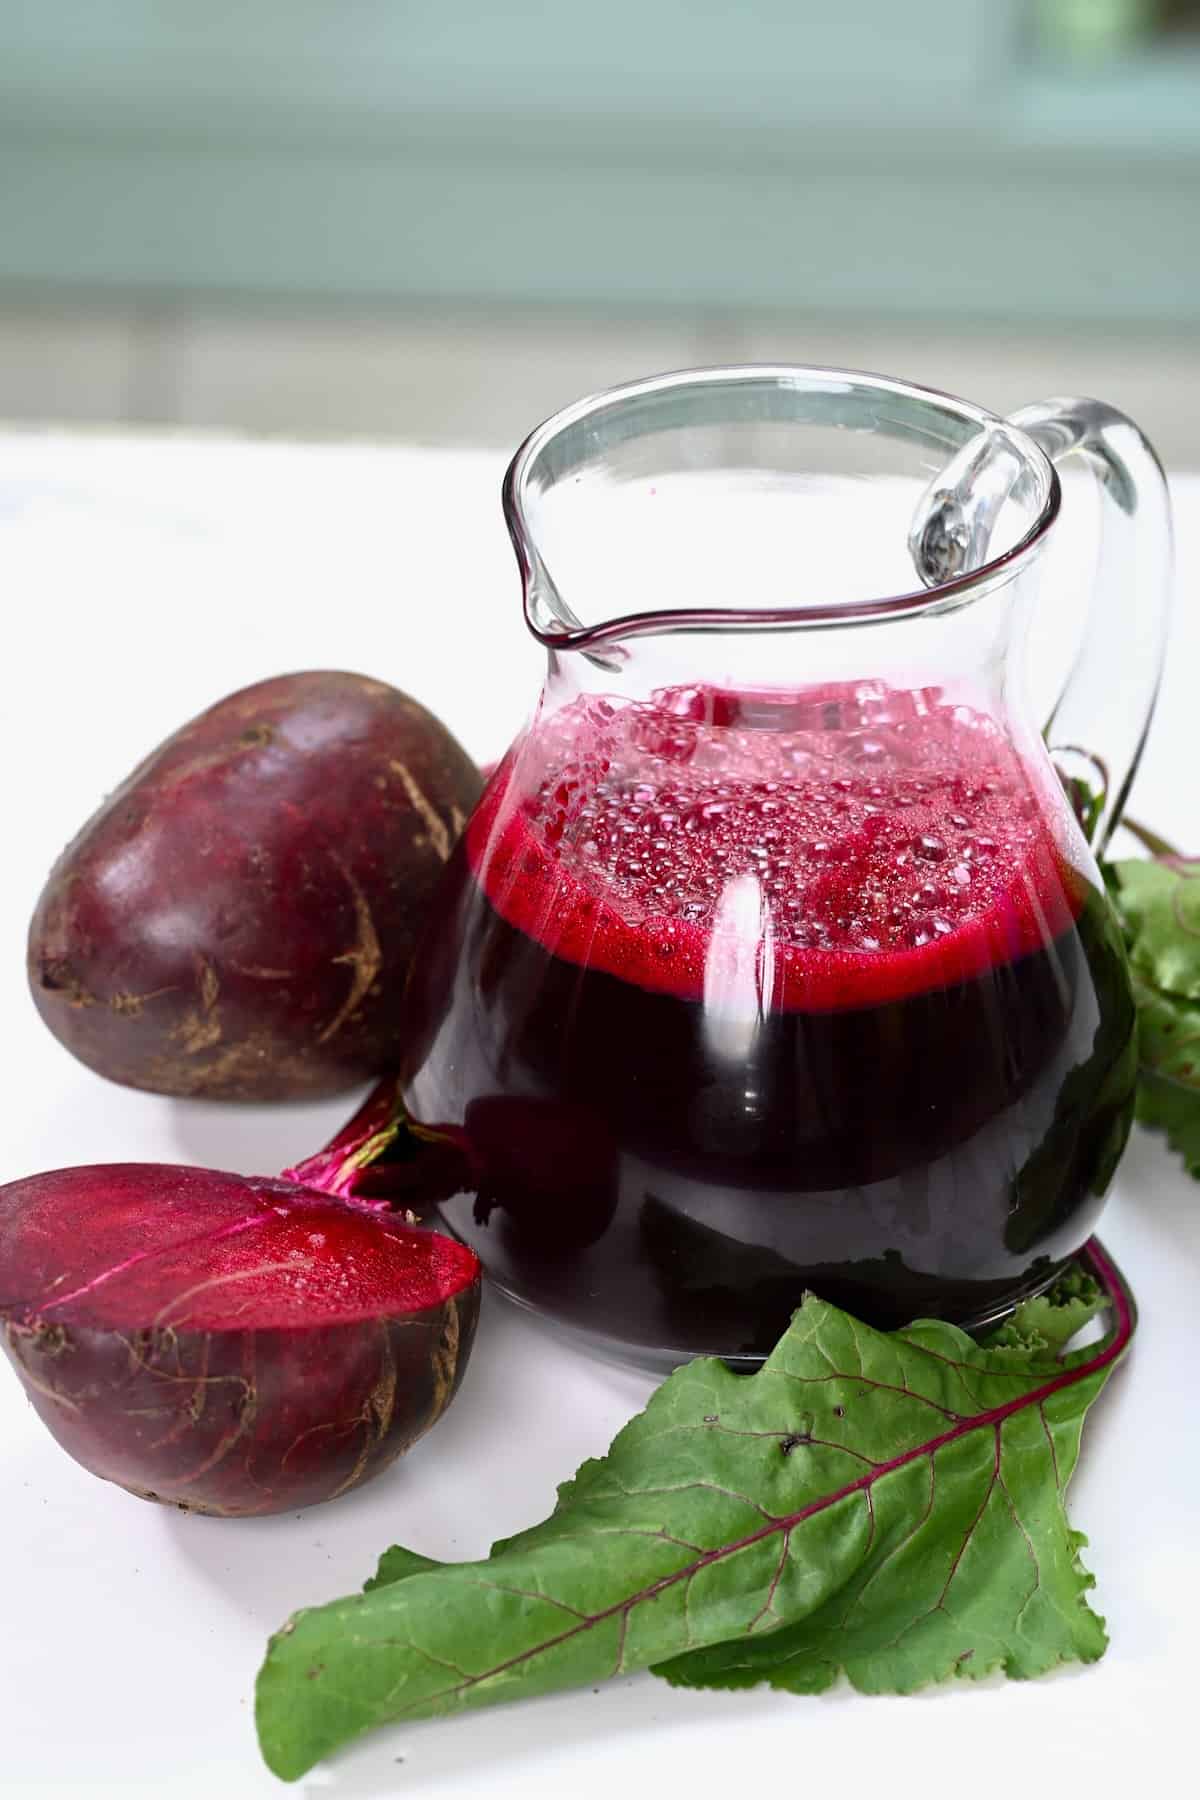 A small jug with beet juice